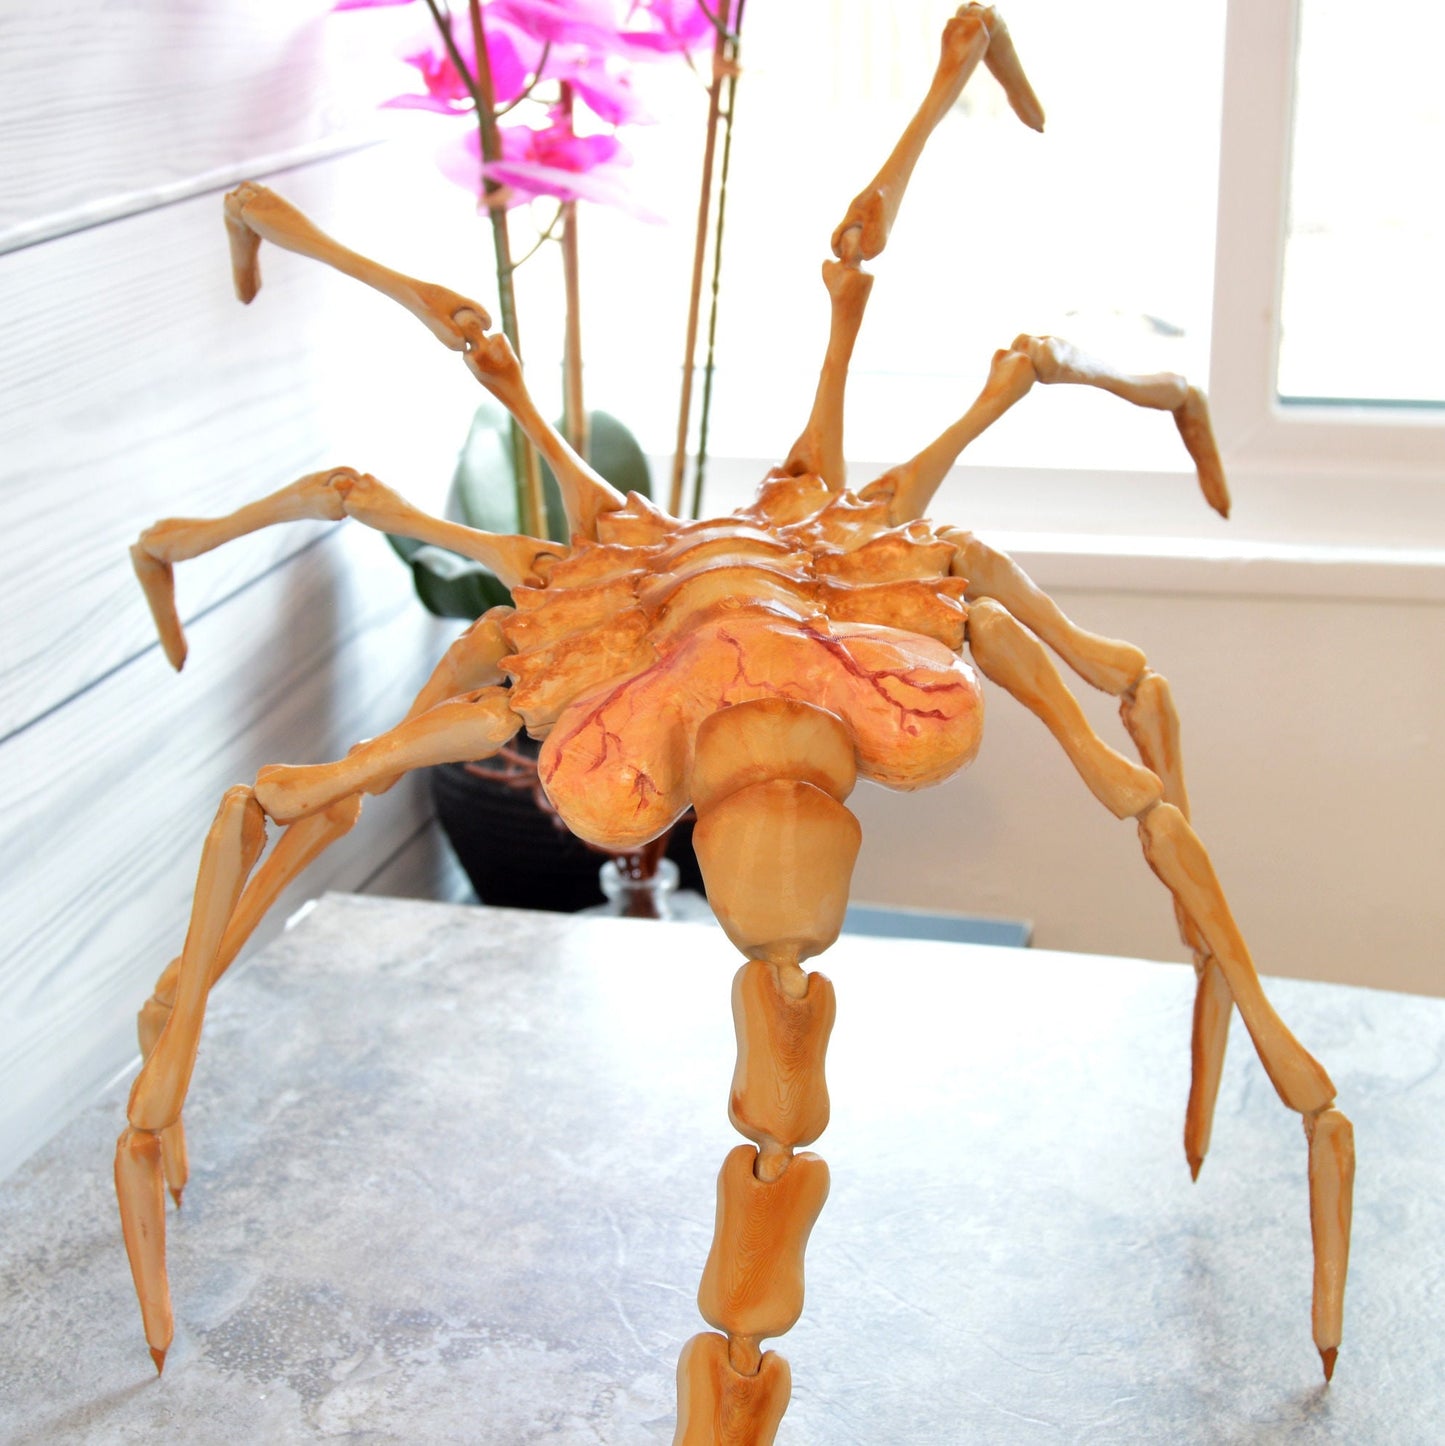 Life Size Alien Face Hugger Replica, Articulated Alien Face Hugger, Facehugger Replica, Alien Movie Prop, Scary Halloween Props, 3D Printed